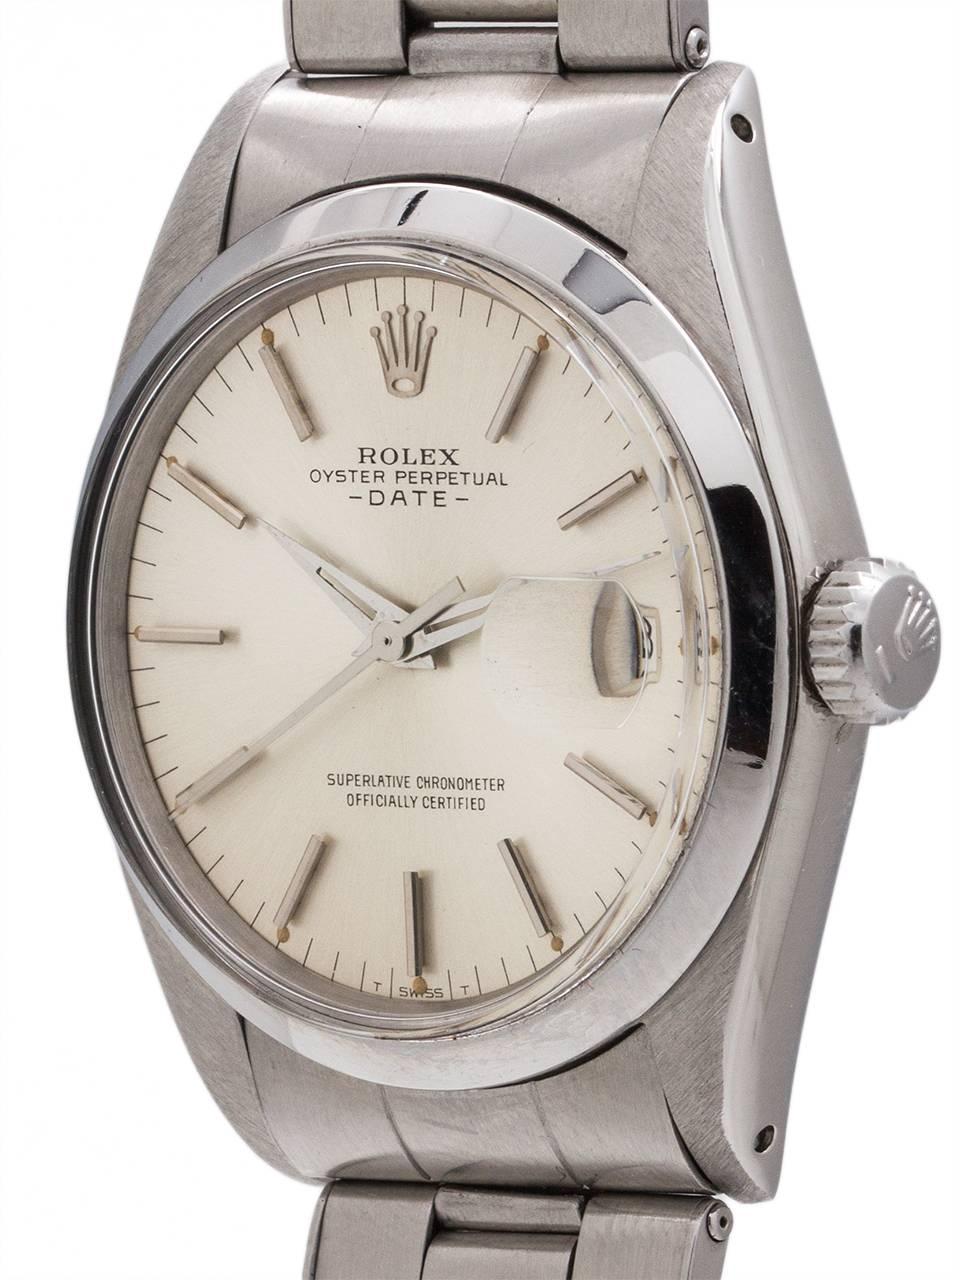 Rolex Stainless Steel Oyster Perpetual Date ref 1500 serial #1.1 million circa 1959. Featuring a 34mm diameter Oyster case with smooth bezel and acrylic crystal and silver dial with applied hour markers, and early style tapered sword hands. Powered